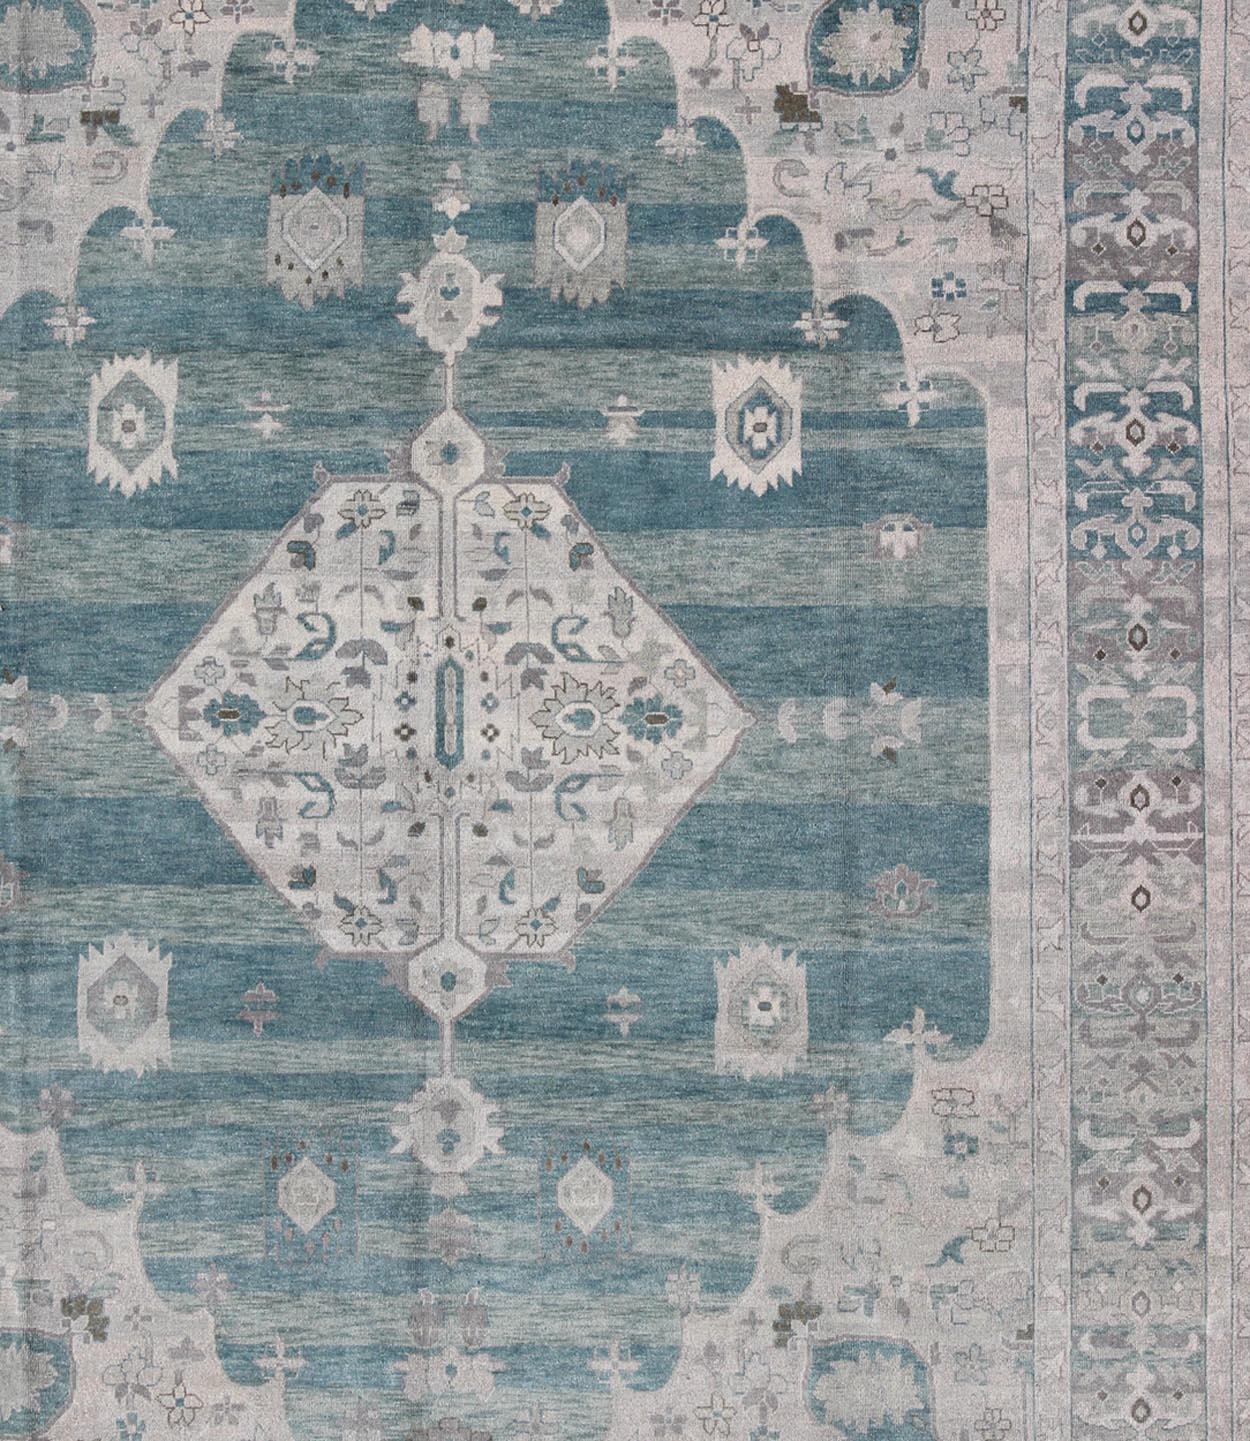 Oushak design in seafoam, silver and shades of gray color palette and center medallion design, Keivan Woven Arts , rug OB-9261028, country of origin / type: India/ Khotan

This hand knotted Oushak rug features a beautiful center medallion design